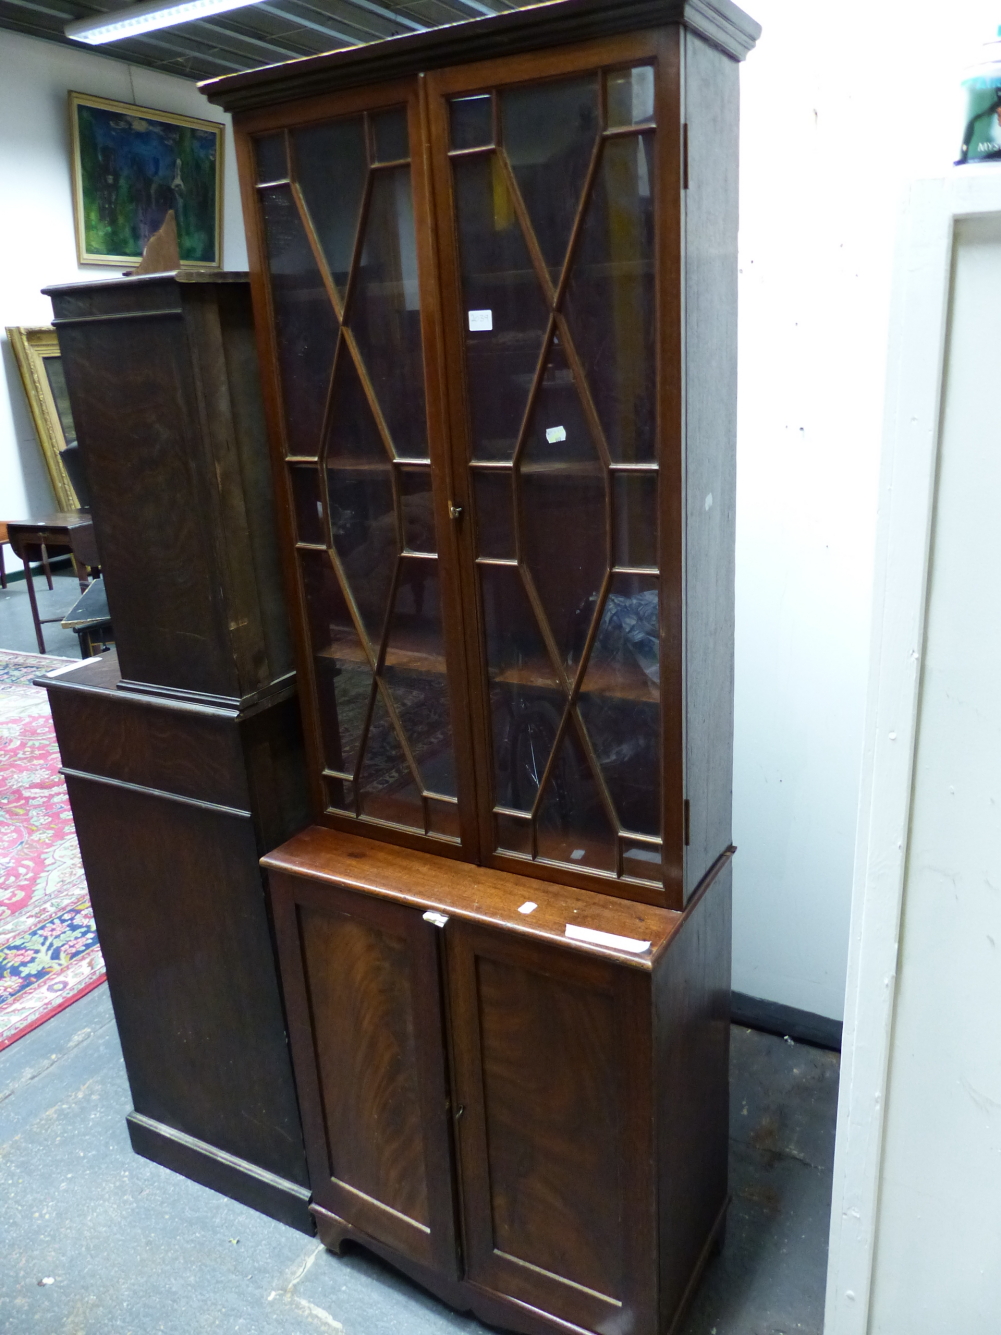 A 19th C. MAHOGANY DISPLAY CABINET, THE UPPER HALF WITH ASTRAGAL GLAZED DOOR, THE BASE WITH A - Image 4 of 9